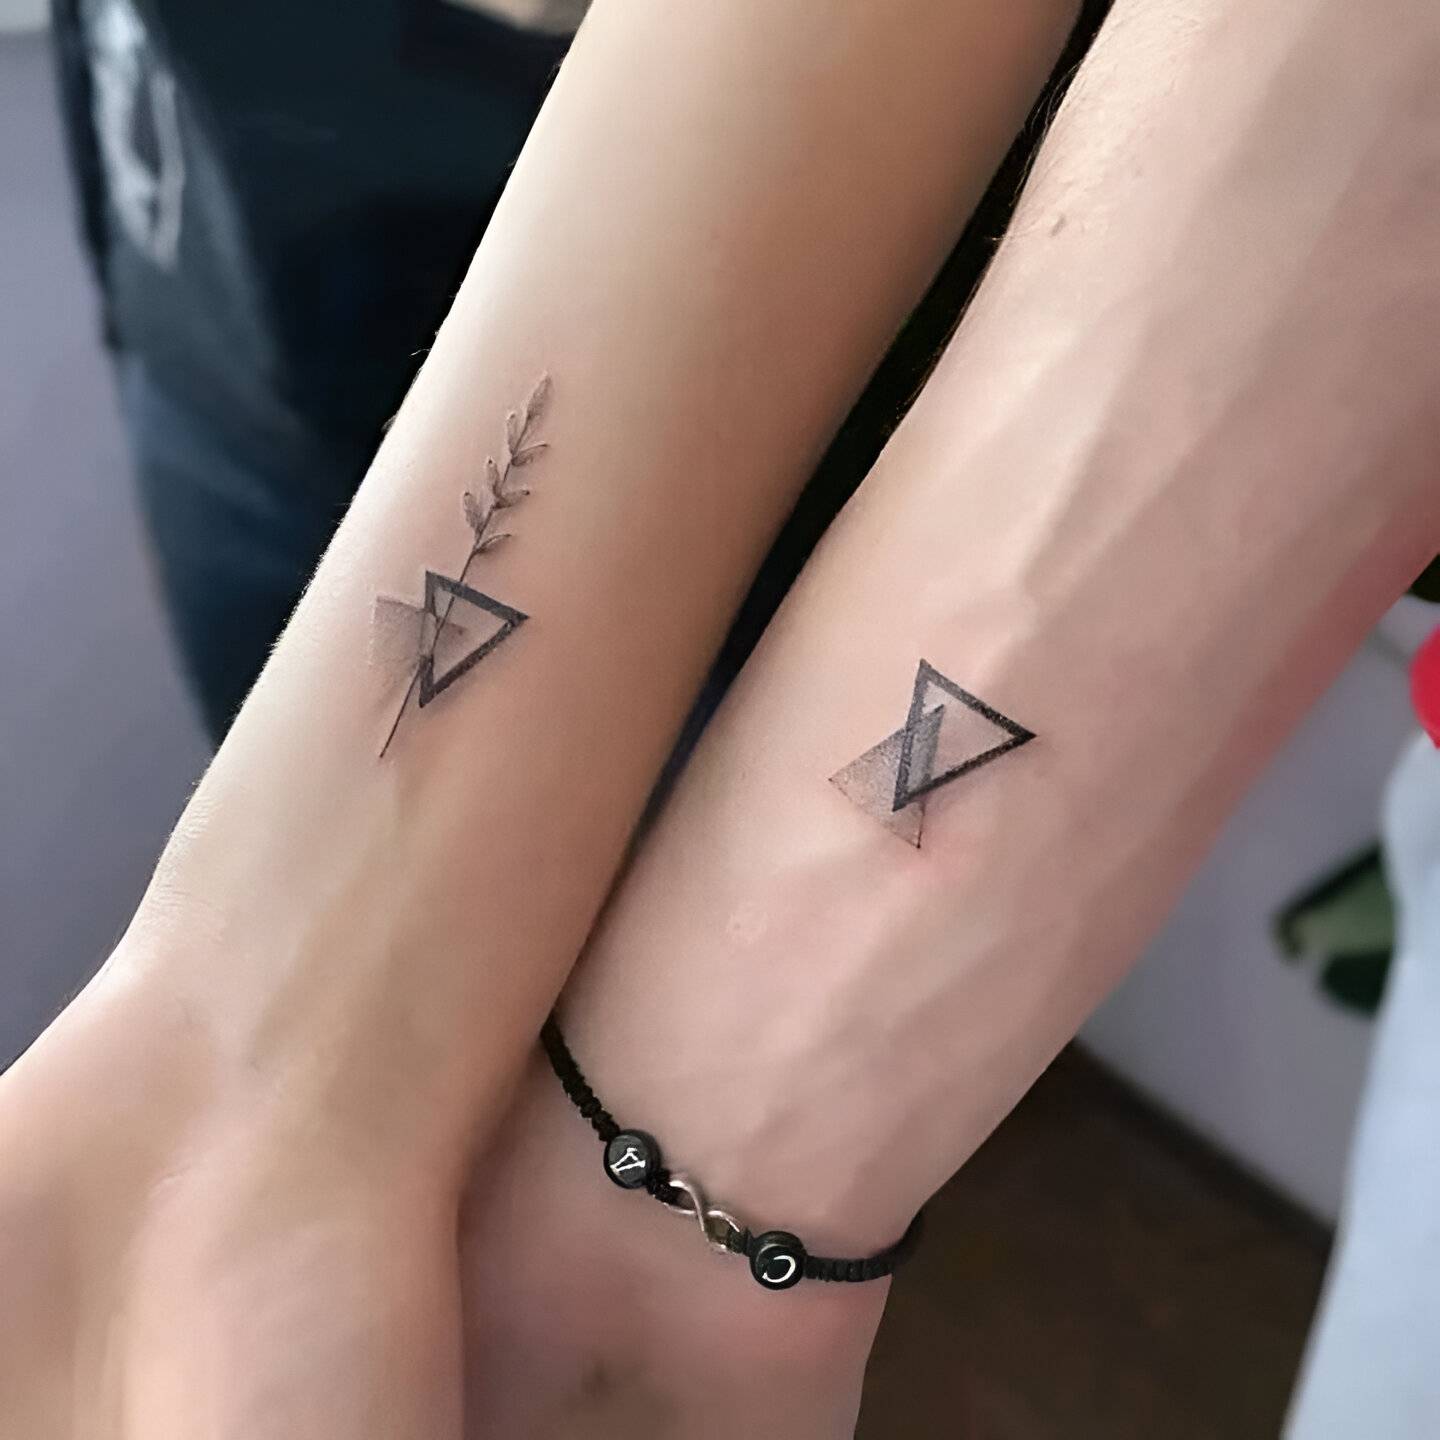 27 Feminine Best Friend Tattoos With The Perfect Elegant Touch 22